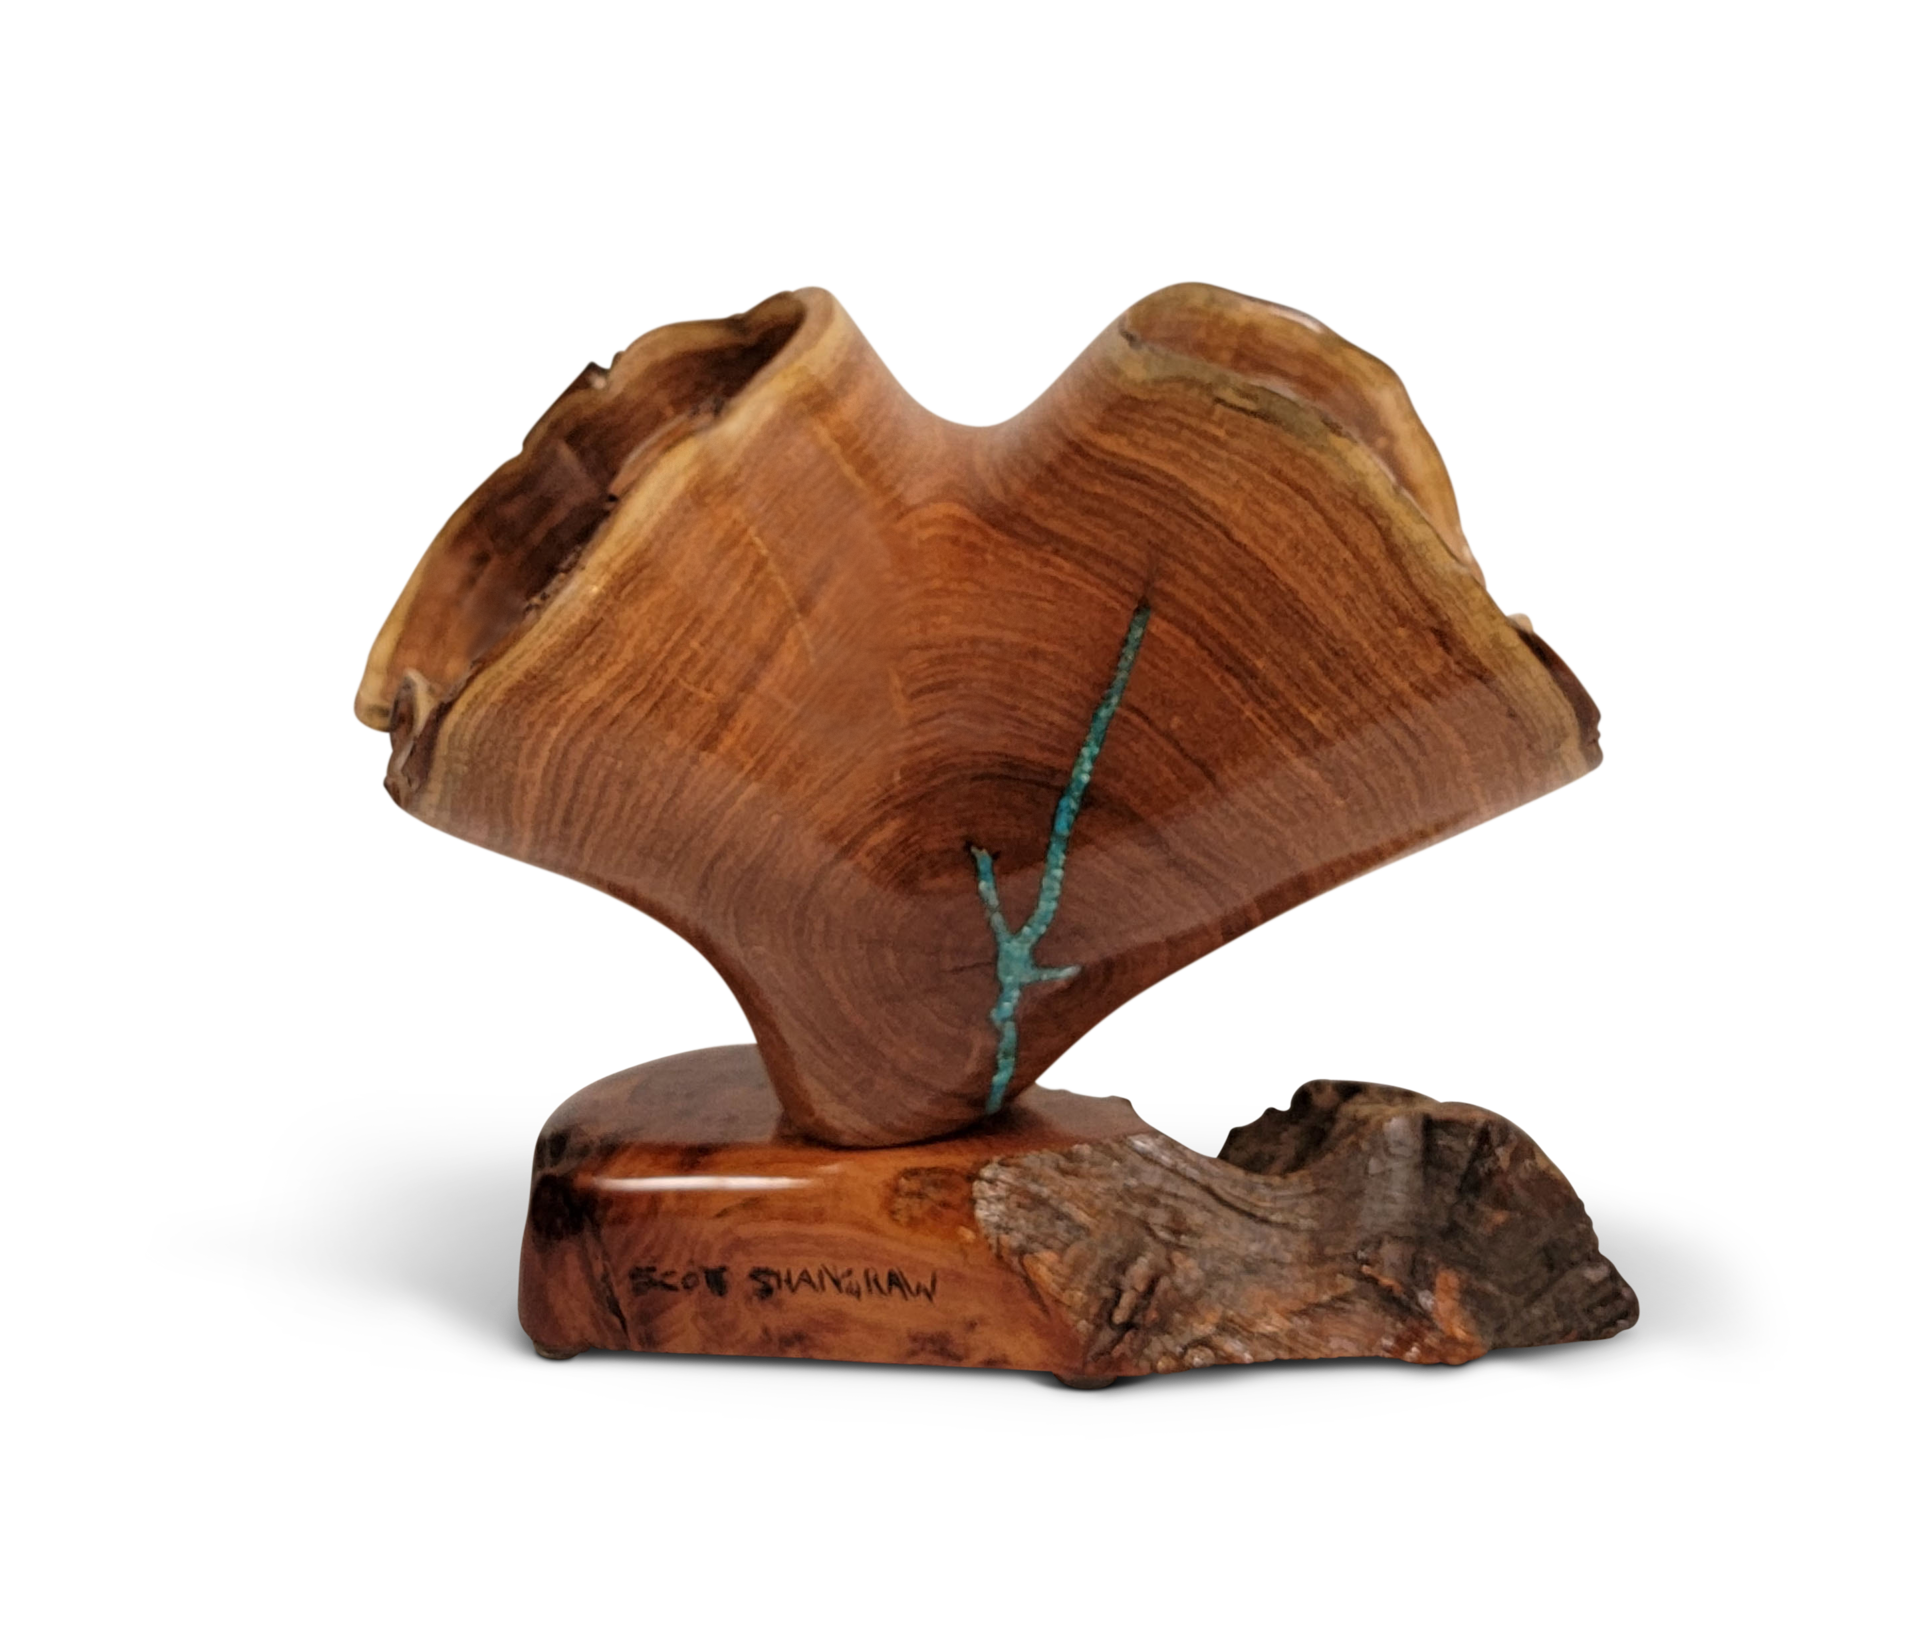 Wavy Sculpture on Base ~ Carved Wood with Turquoise Inlay by Scott & Stephanie Shangraw